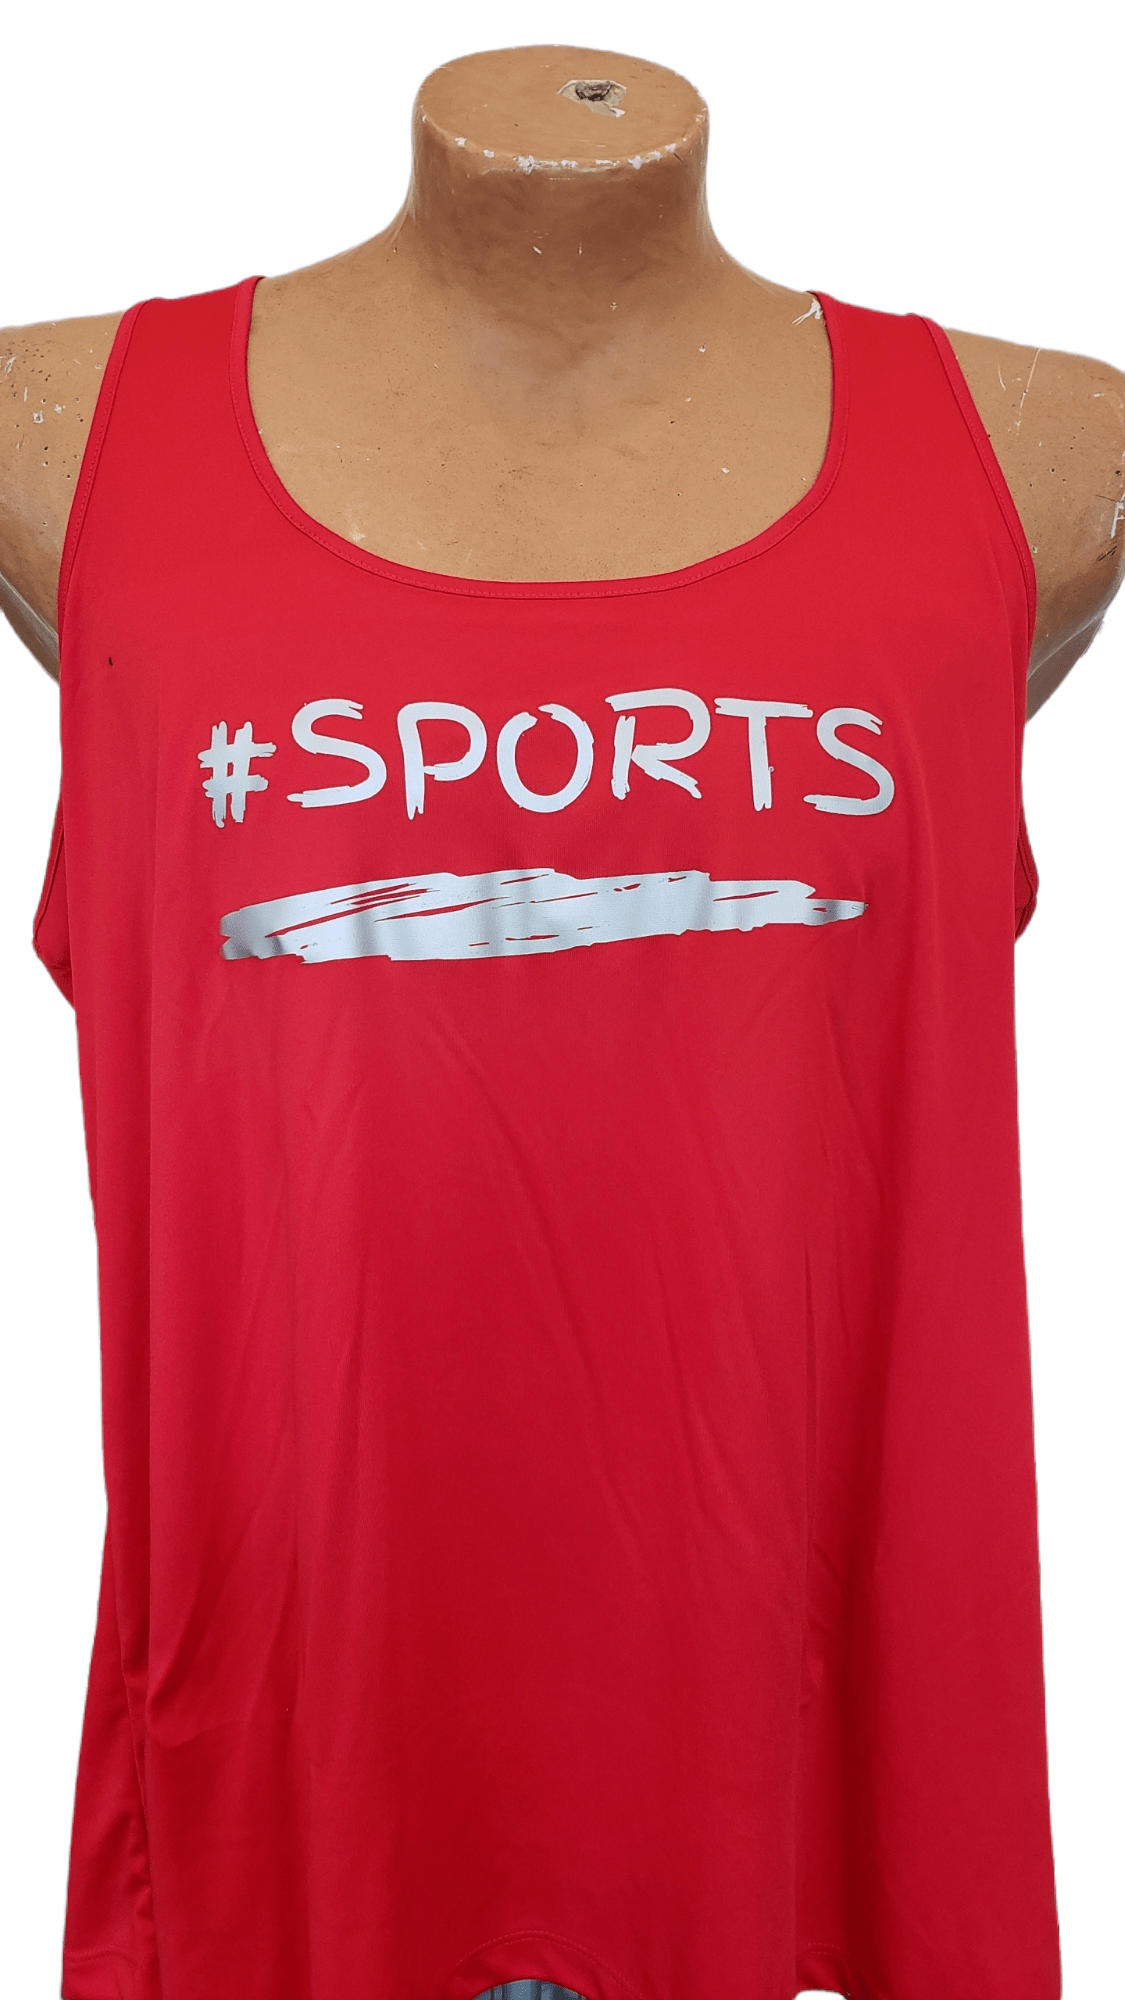 Carrot Stick Sports Clothing 3X-Large #Sports Tank Top